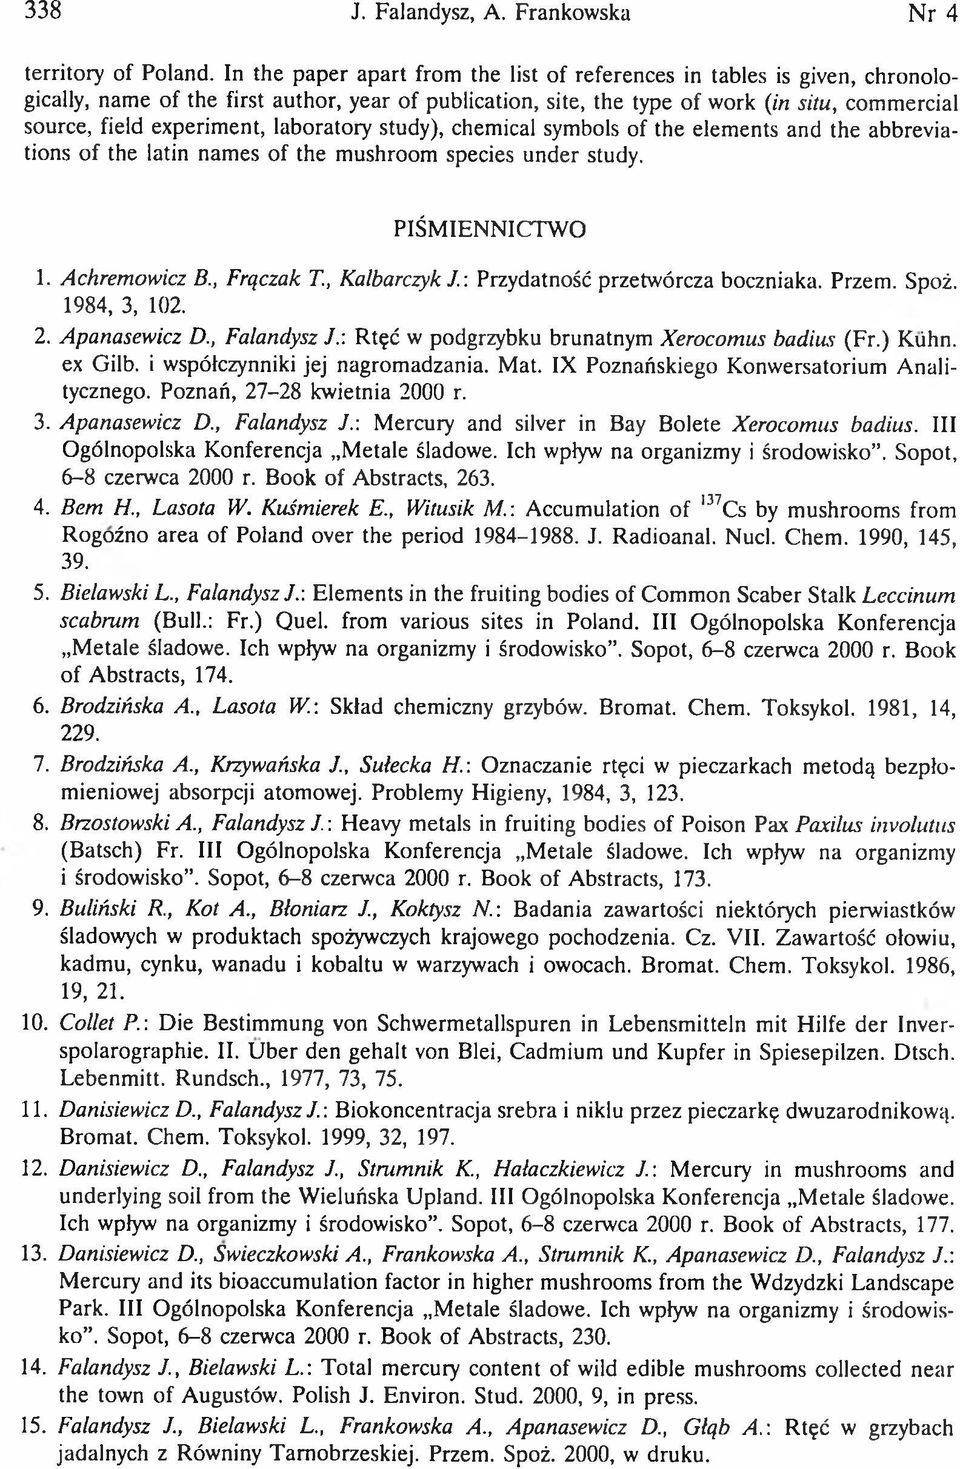 experiment, laboratory study), chemical symbols of the elements and the abbreviations of the latin names of the mushroom species under study. PIŚMIENNICTWO 1. Achremowicz B., Frączak Т., Kalbarczyk J.